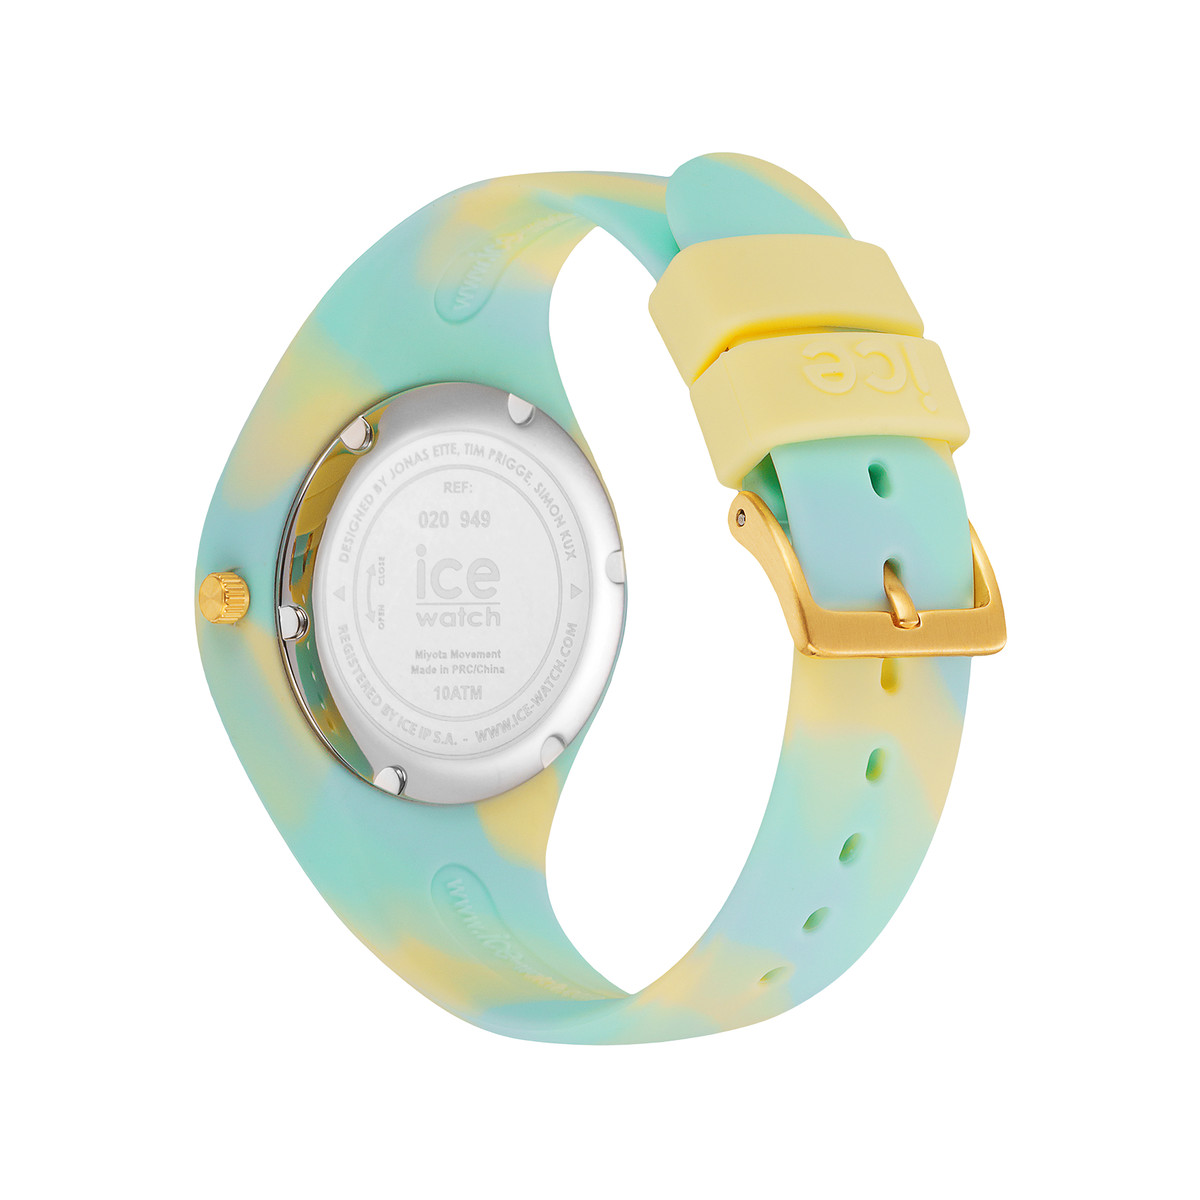 Montre ICE WATCH Ice Tie and Dye femme bracelet silicone bleu clair - vue 3